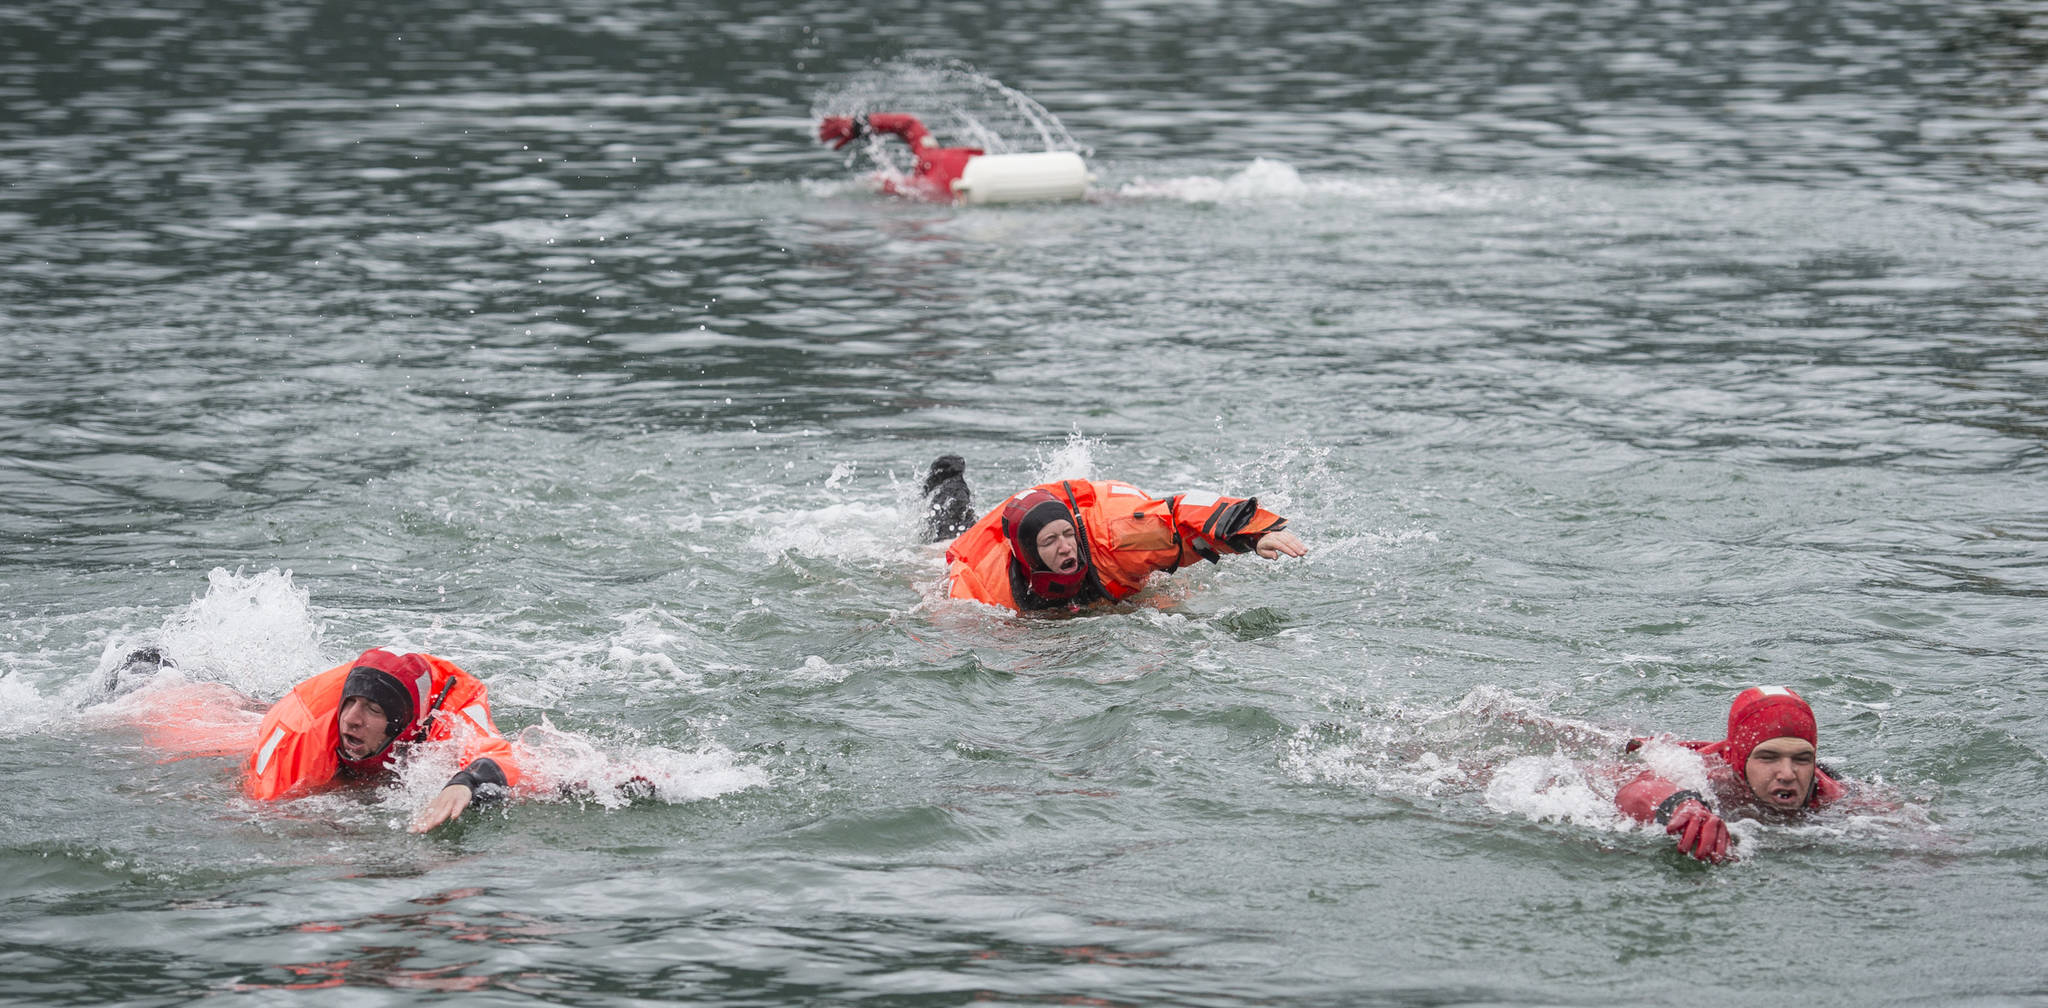 U.S. Coast Guard teams from the Guard Cutters Hickory, Sycamore, Anthony Petit and Kukui compete in the survival suit swim during the Buoy Tender Olympics at Station Juneau on Wednesday, Aug. 22, 2018. (Michael Penn | Juneau Empire)